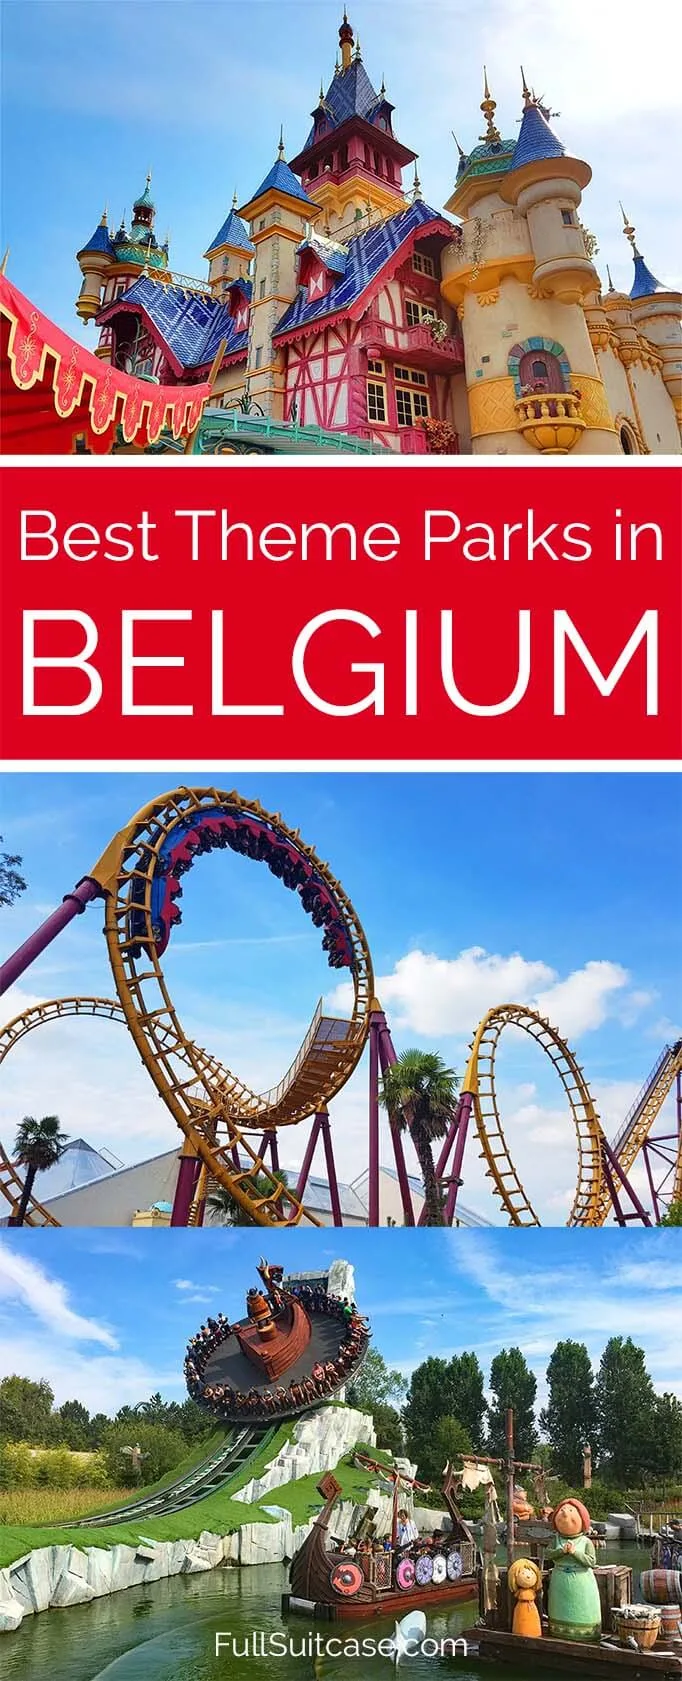 Complete list of the very best theme parks in Belgium- amusement parks, best rides, animal parks and more..